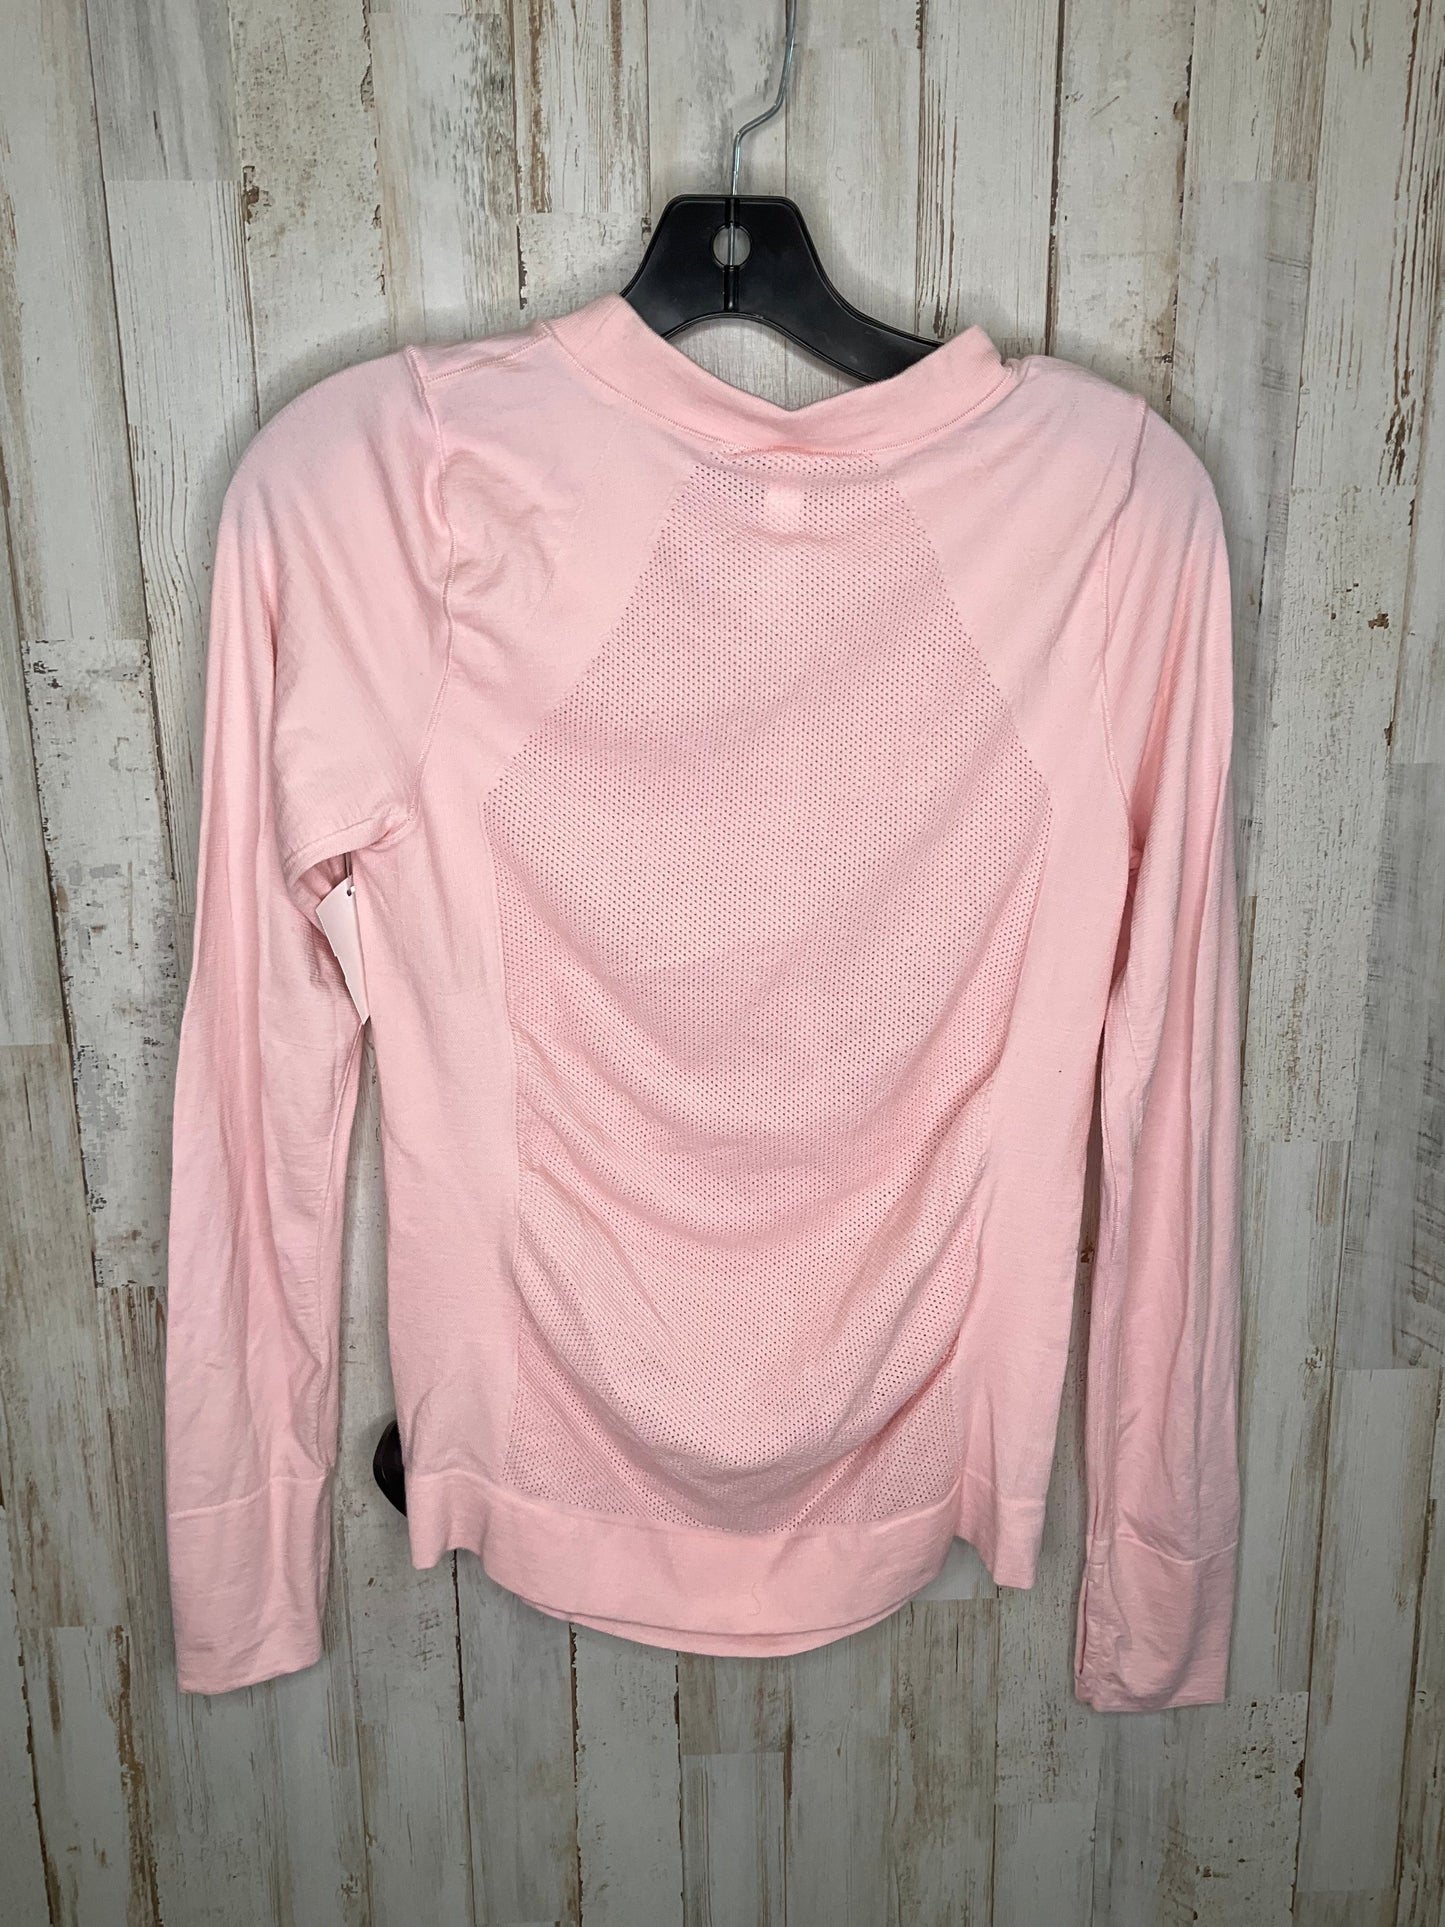 Pink Athletic Top Long Sleeve Collar Athleta, Size L